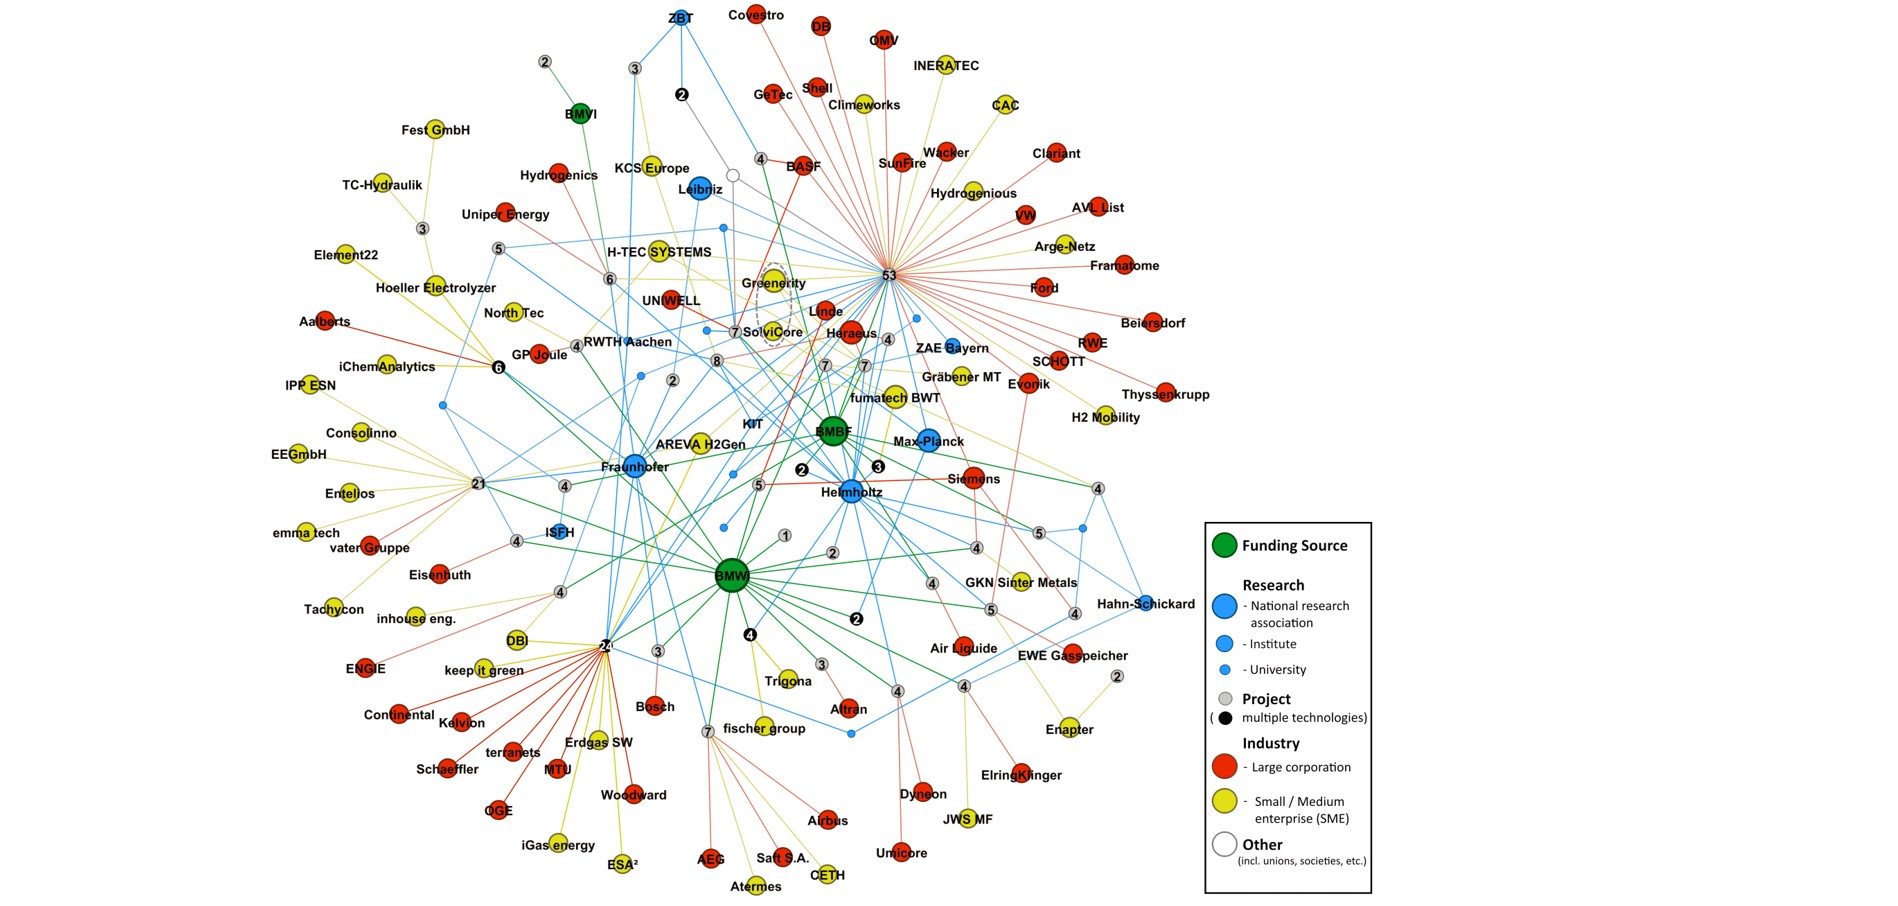 Figure 2: Network graph for public funding of projects related to PEM and/or AEM electrolysis in Germany.